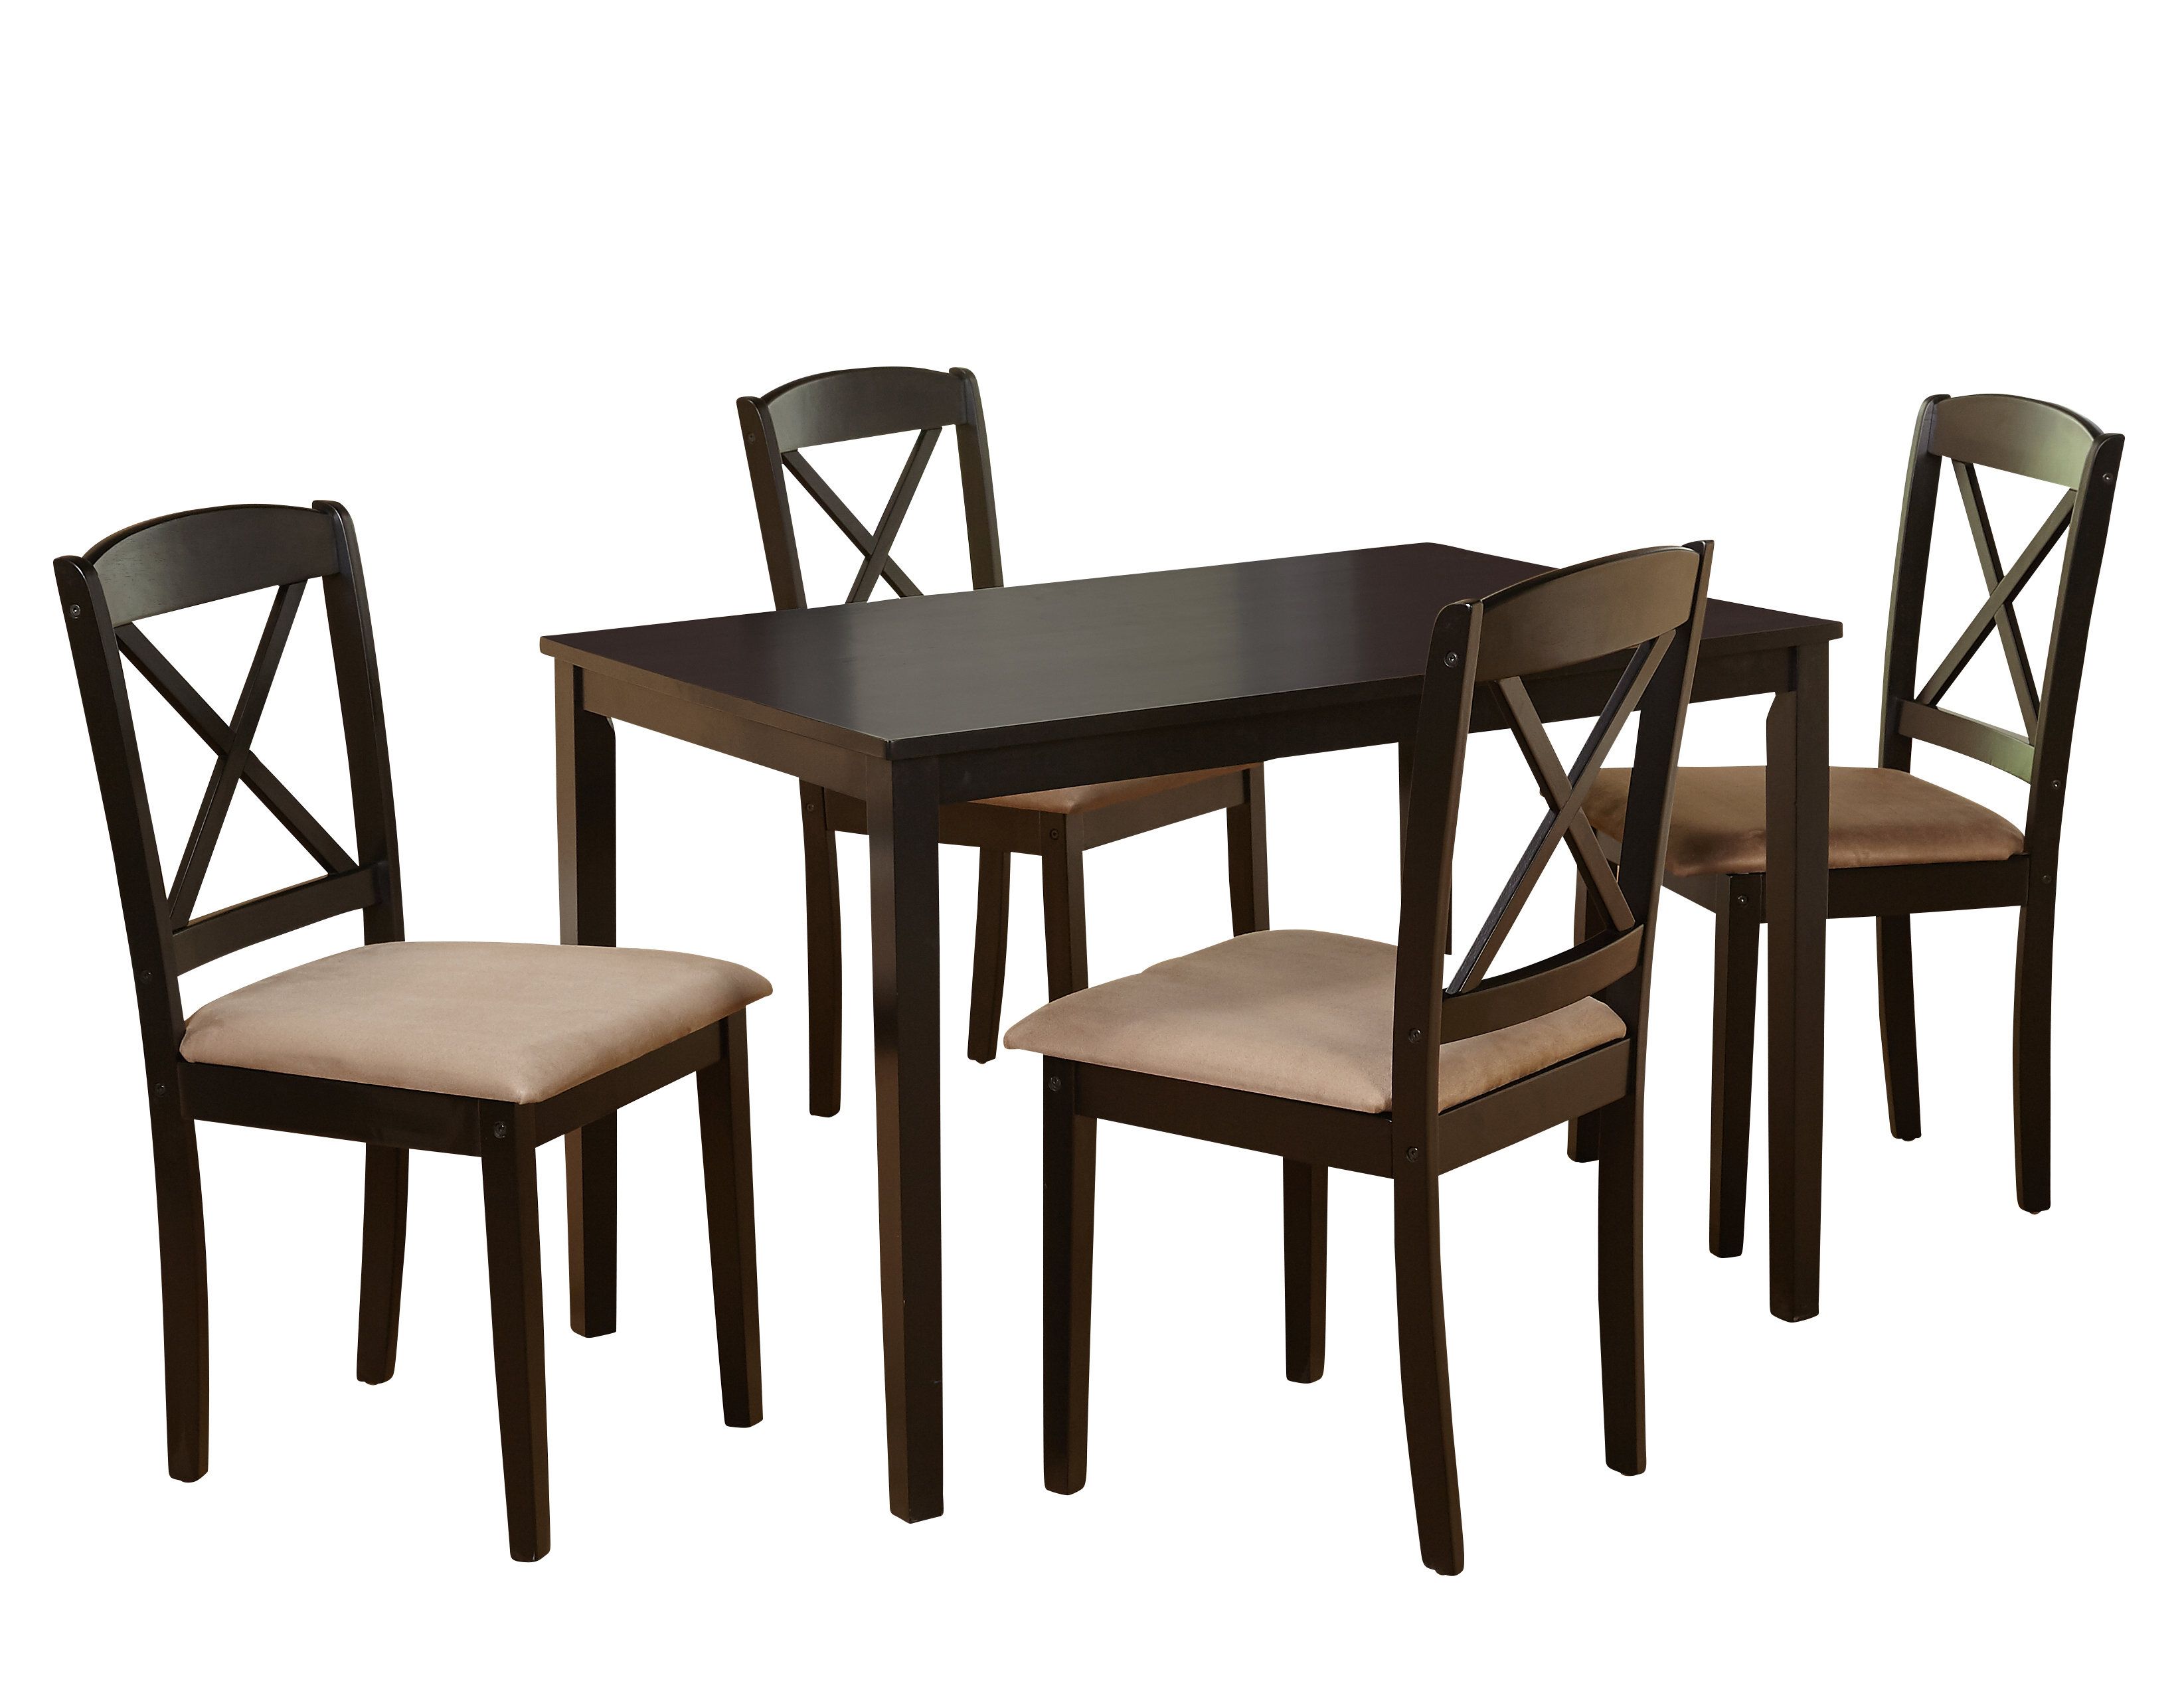 Scarlett 5 Piece Dining Set With Recent Pattonsburg 5 Piece Dining Sets (View 15 of 20)